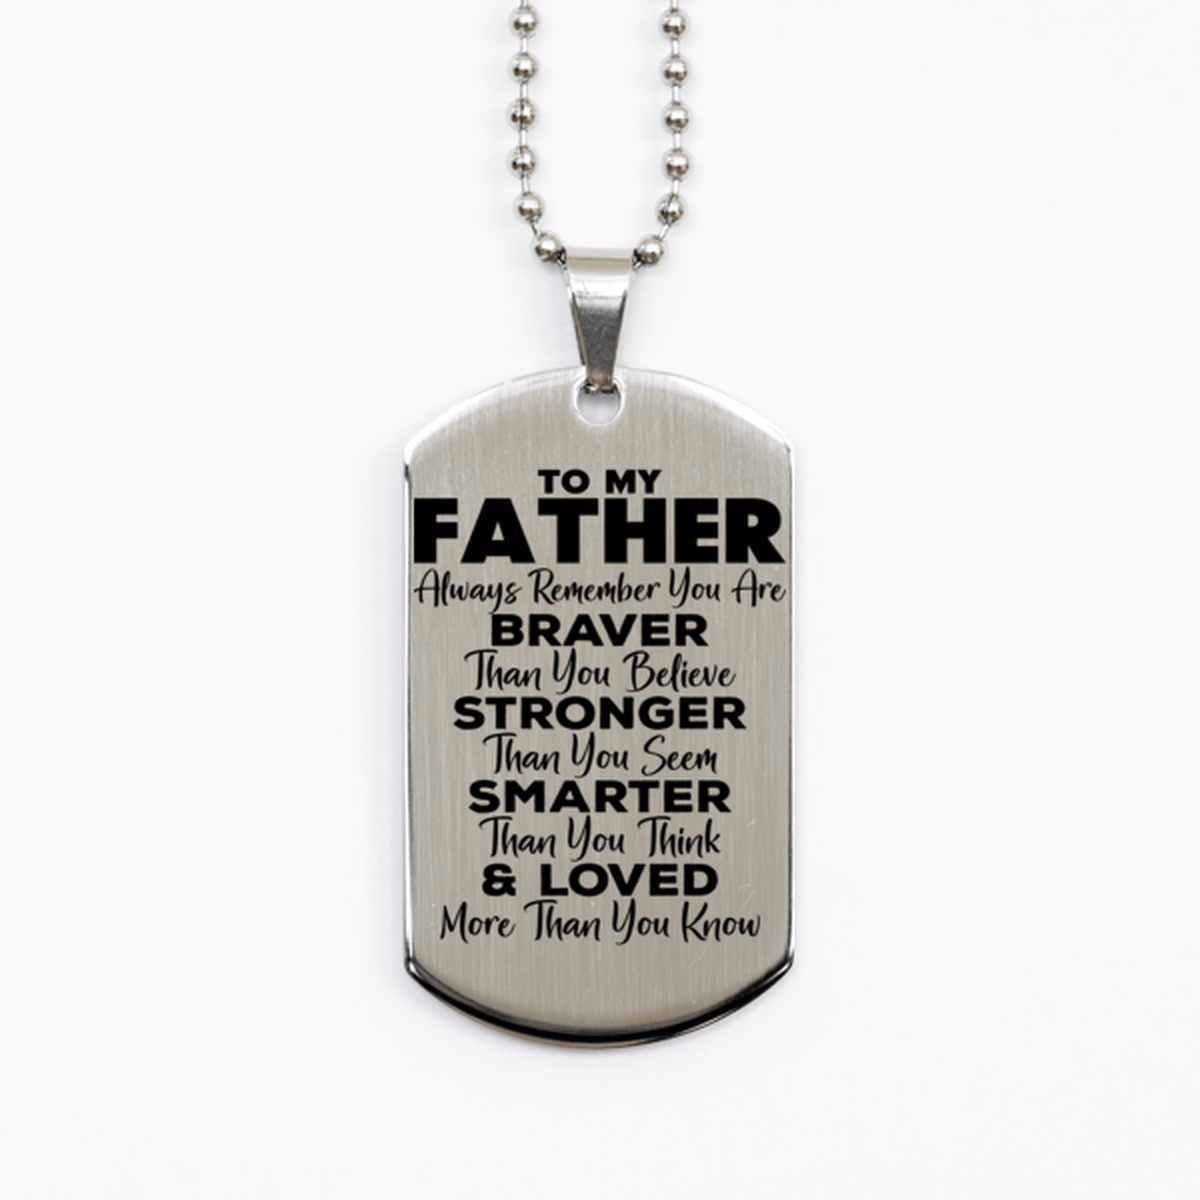 Motivational Father Silver Dog Tag Necklace, Father Always Remember You Are Braver Than You Believe, Best Birthday Gifts for Father